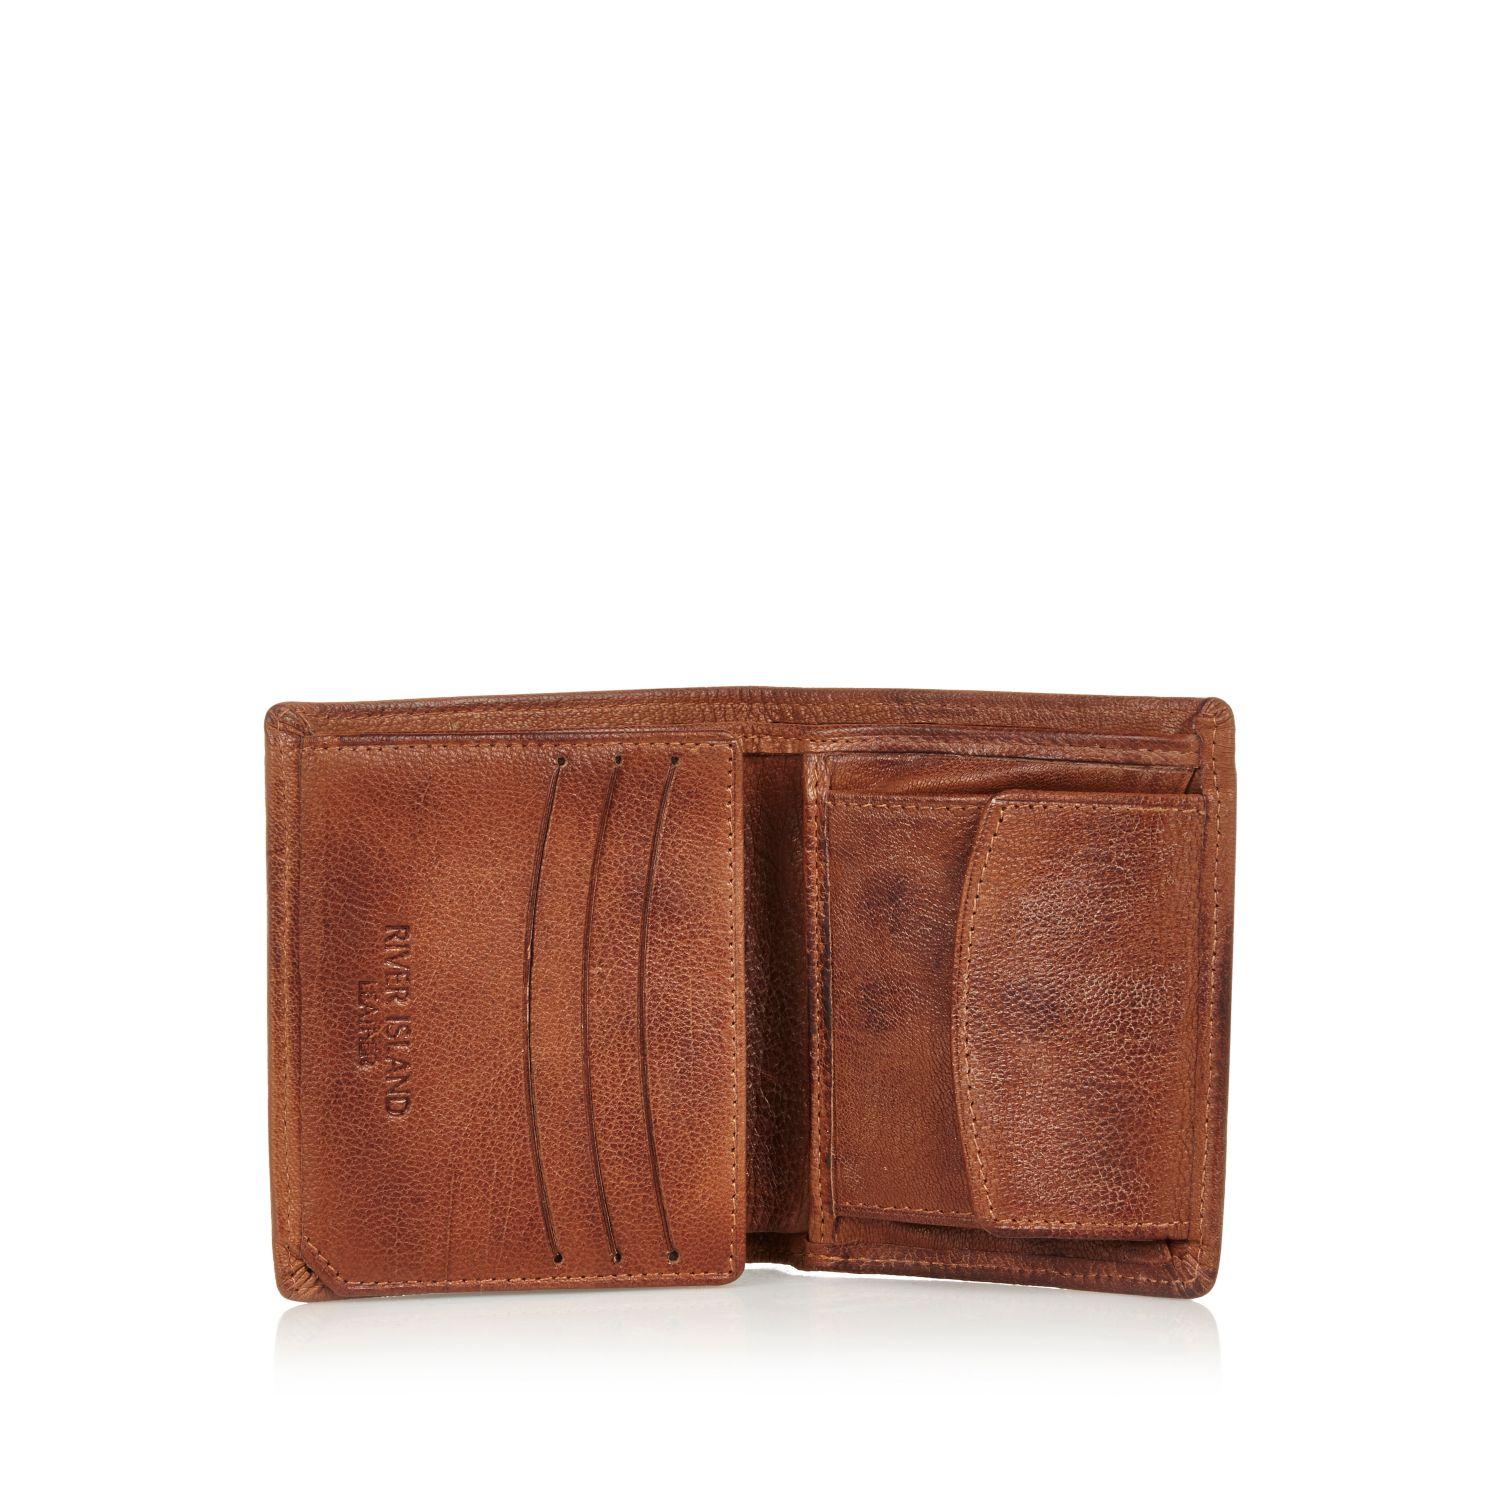 Lyst - River Island Brown Leather Three Fold Wallet in Brown for Men